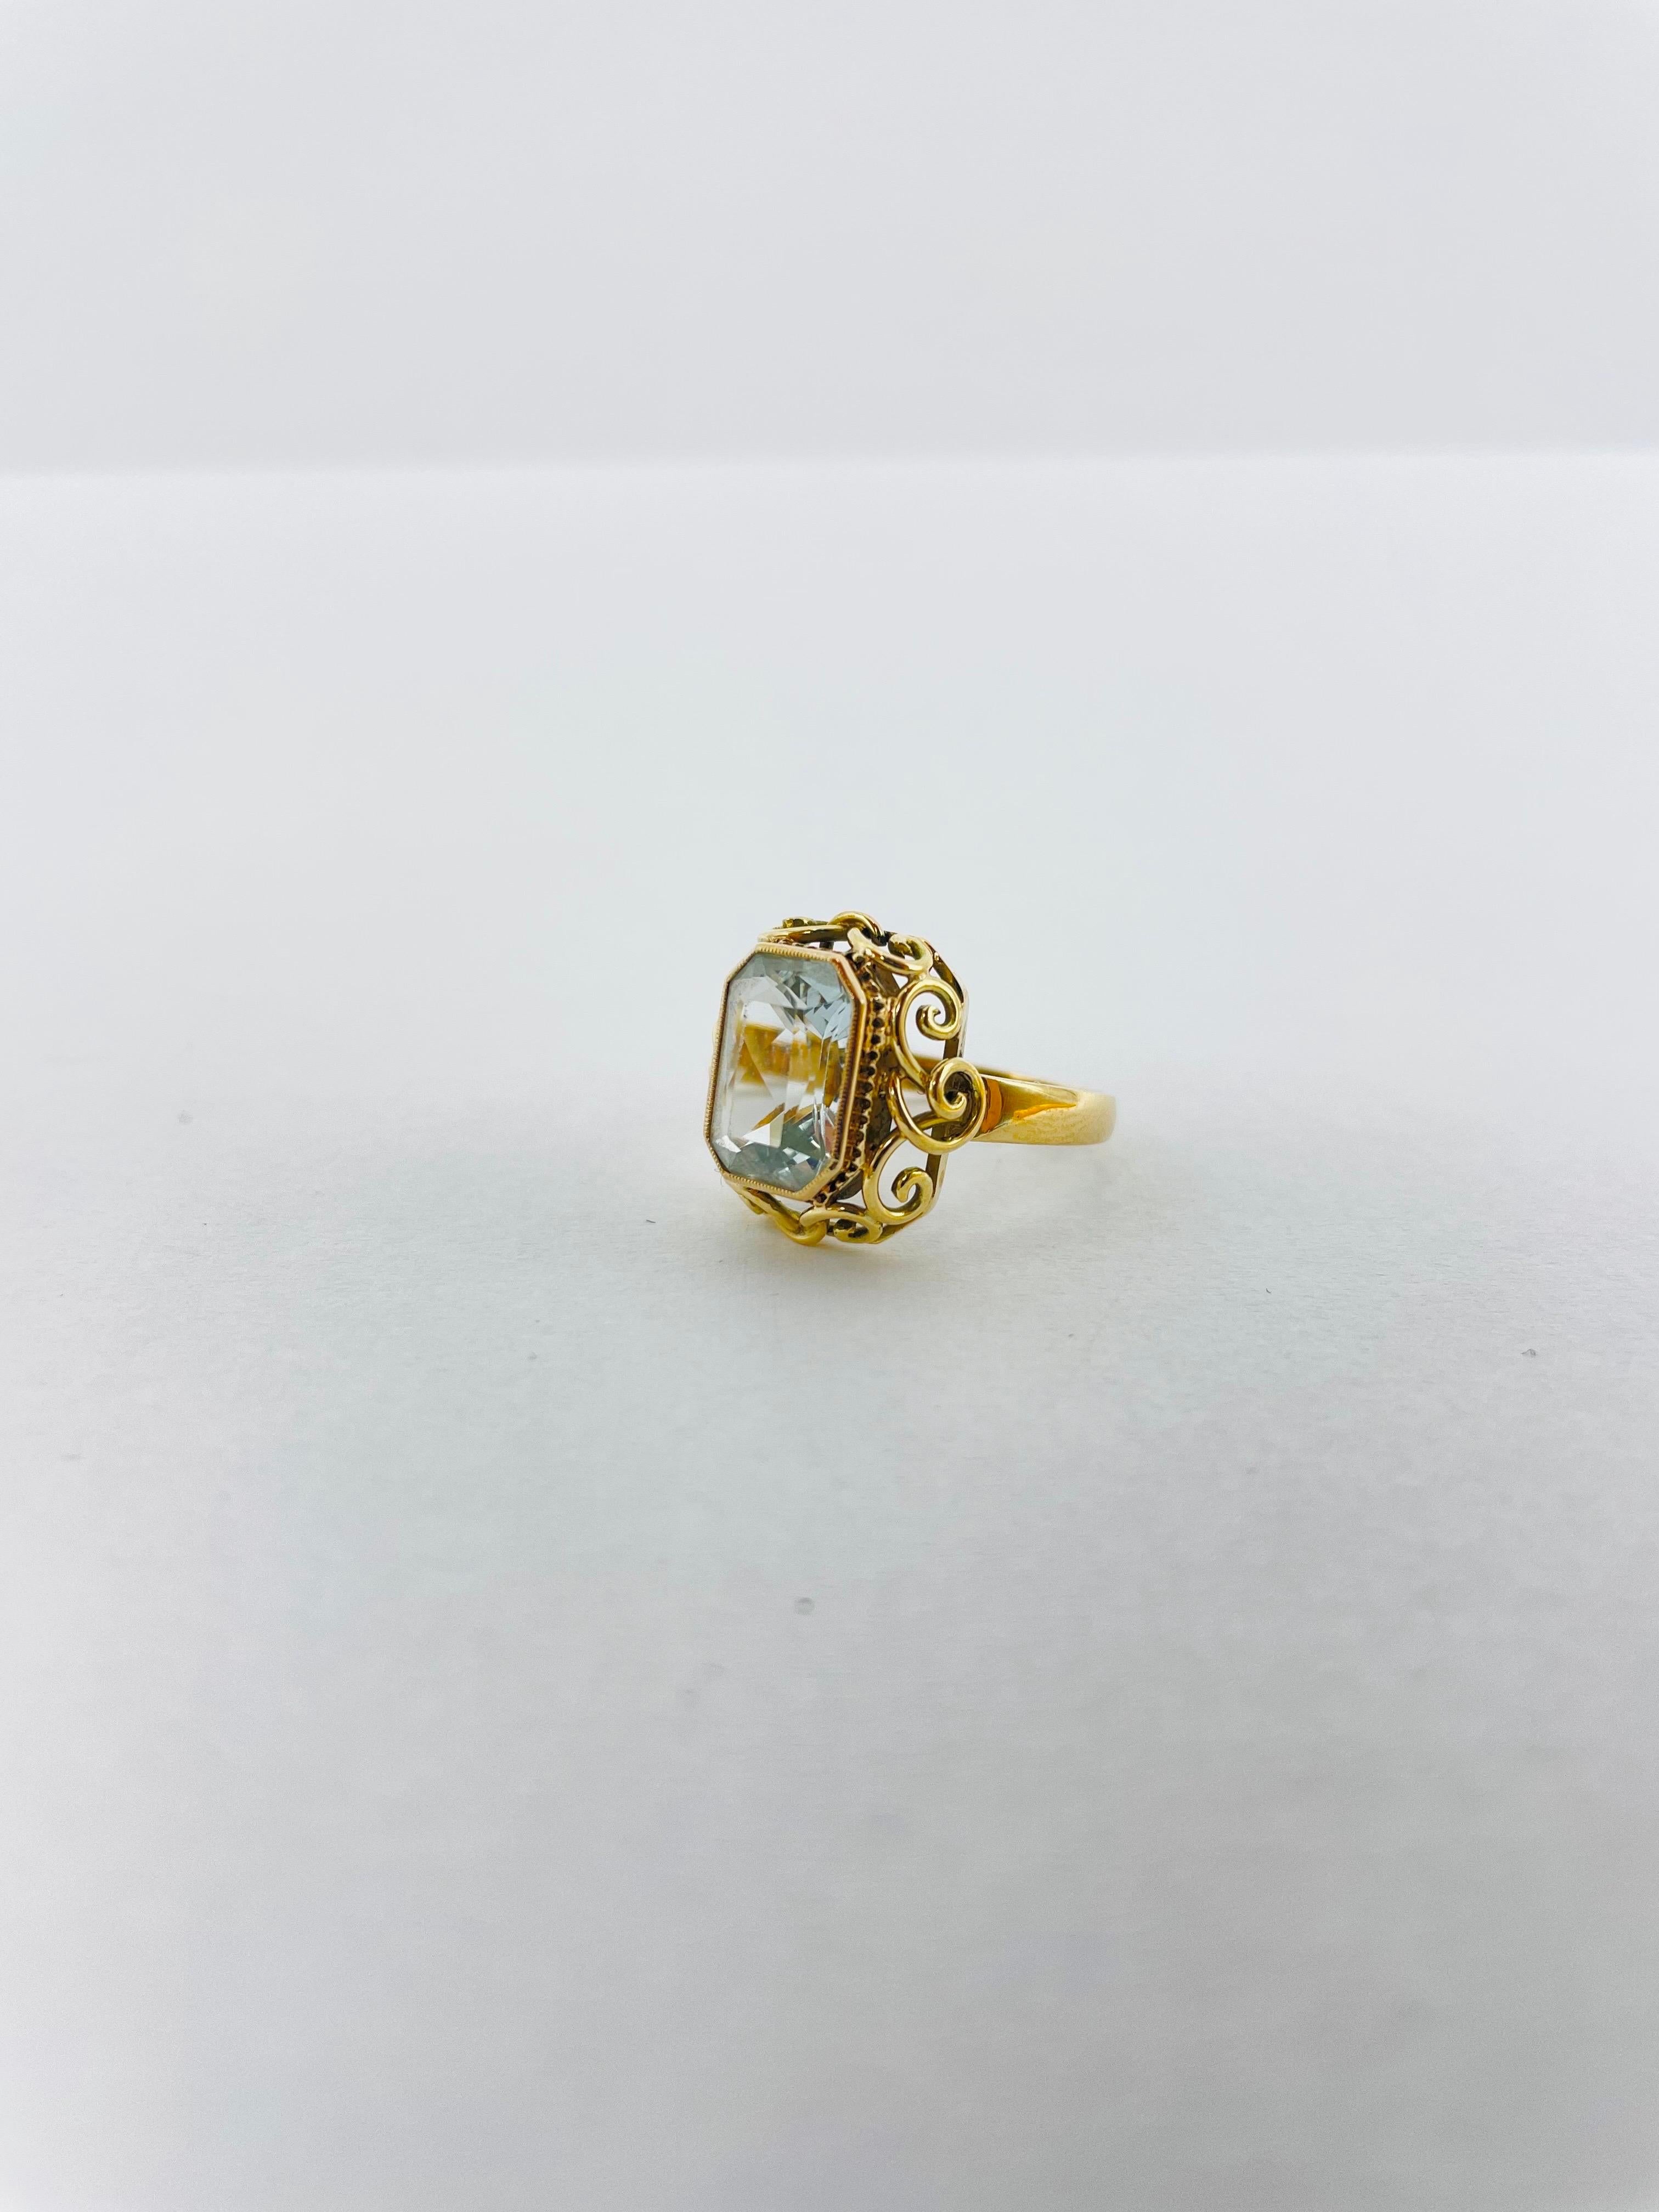 Behold the stunning Noble 14k Gold Cocktail Ring, a true masterpiece of fine jewelry. This piece exudes elegance and sophistication with its immaculate craftsmanship and exquisite design.

Crafted from the finest 14k yellow gold, this ring boasts a